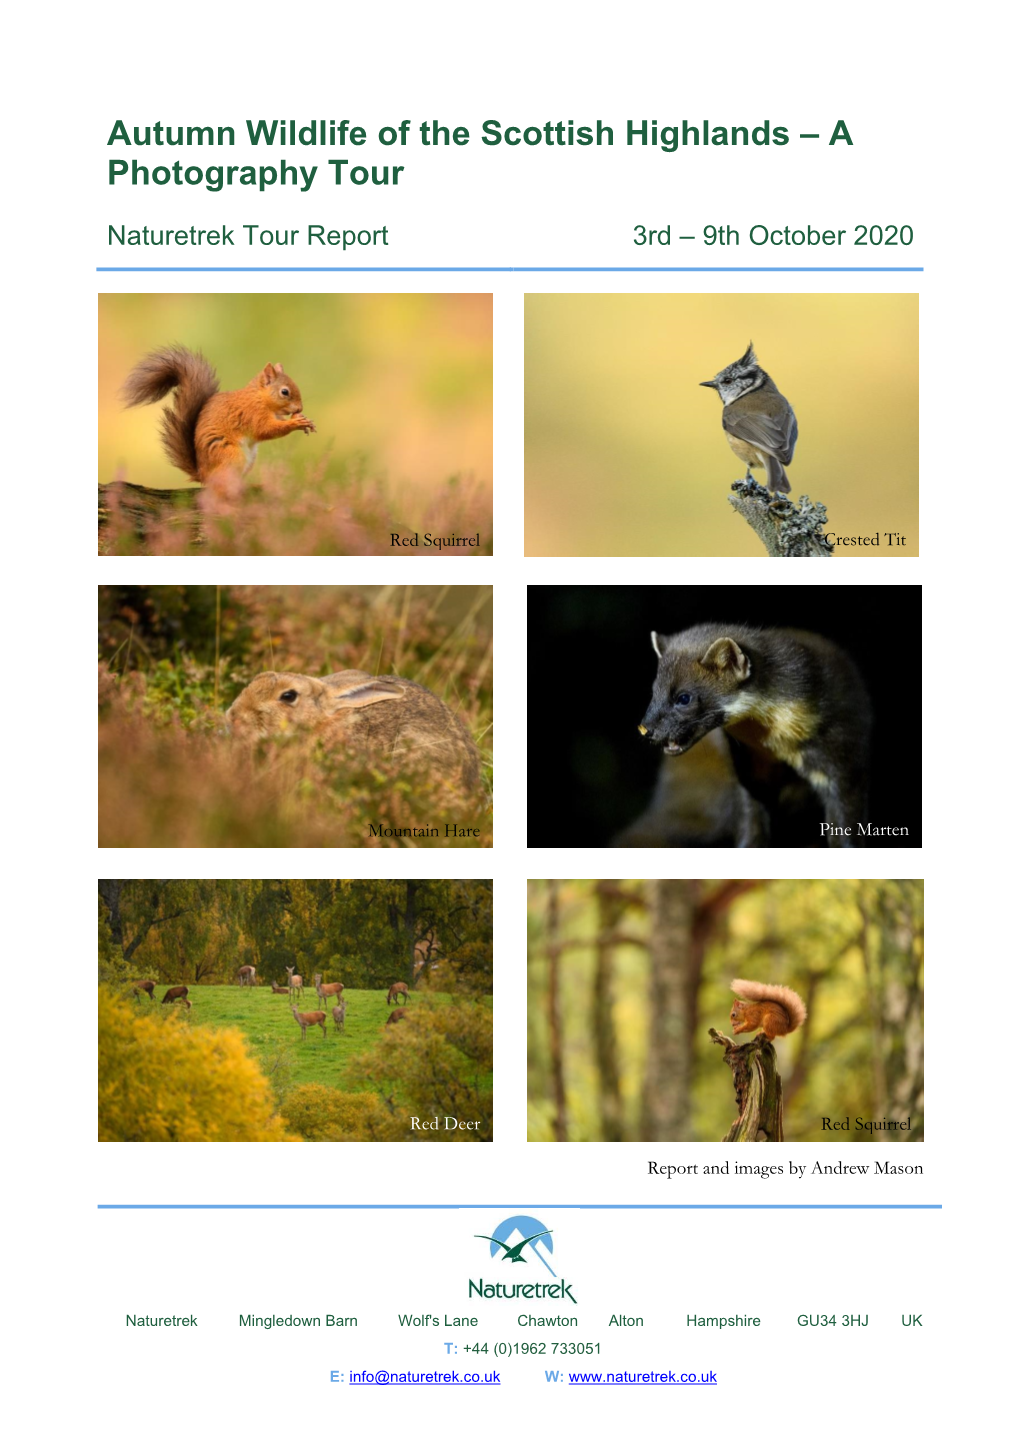 Autumn Wildlife of the Scottish Highlands – a Photography Tour